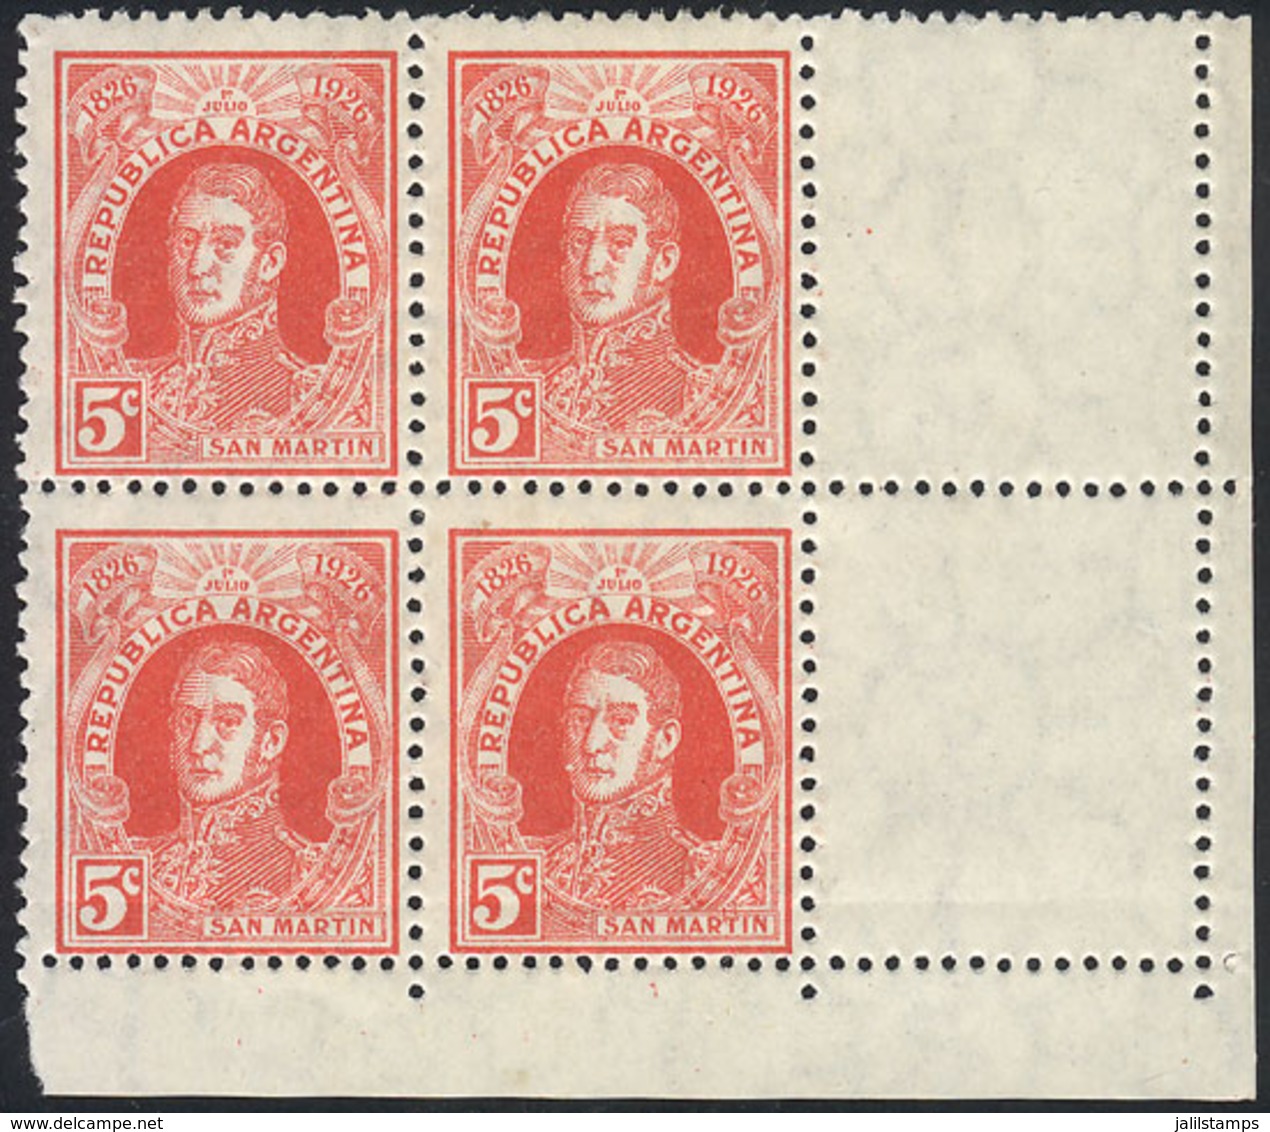 ARGENTINA: GJ.622CD, 1926 5c. San Martín, Block Of 4 With LABELS AT RIGHT, Very Nice! - Briefe U. Dokumente